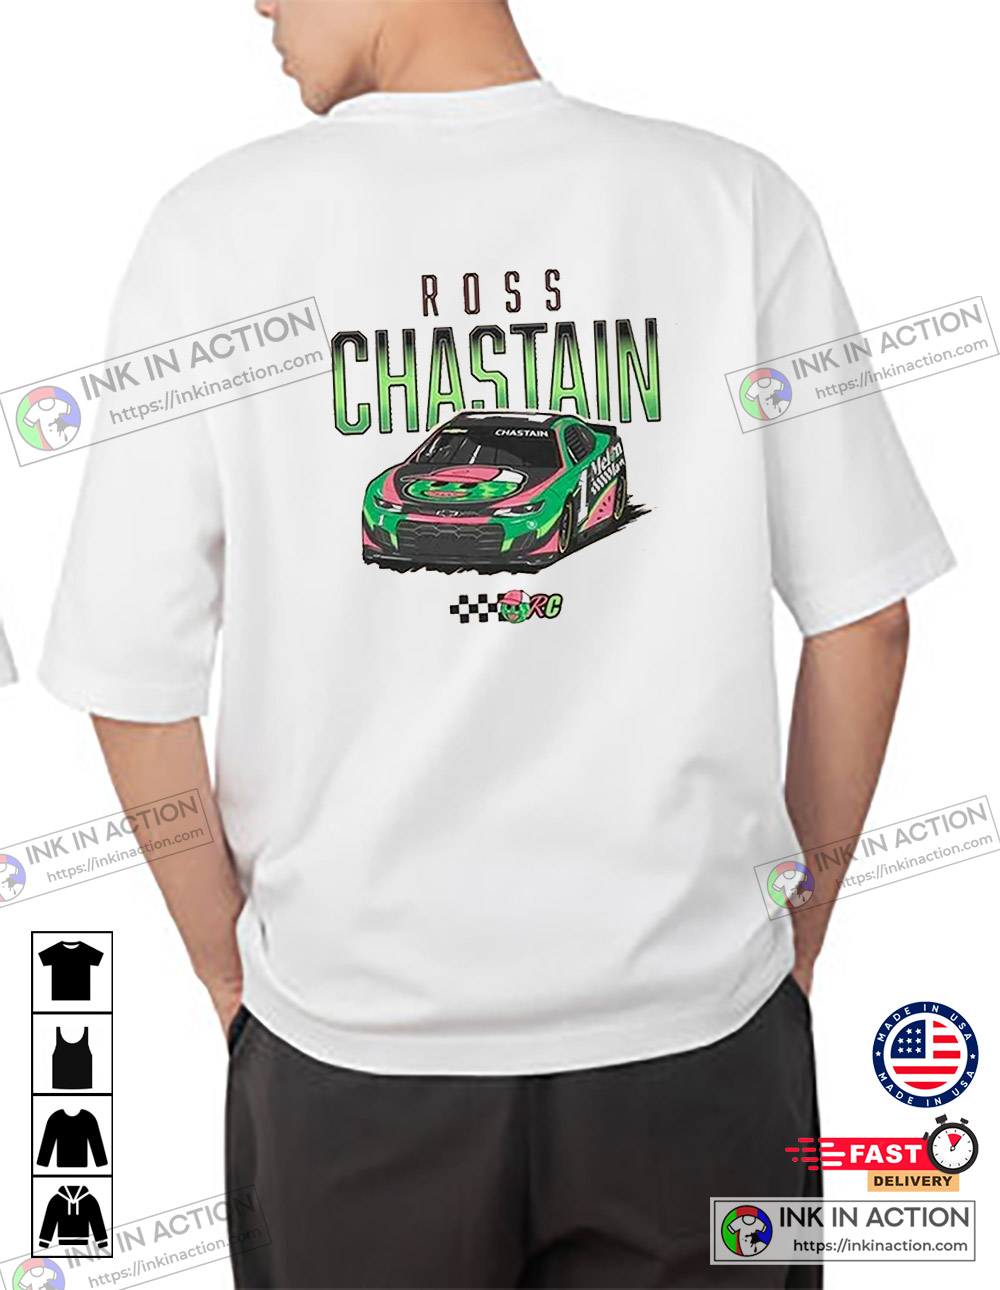 Trackhouse Entertainment Group Ross Chastain Melon Man Jersey Large